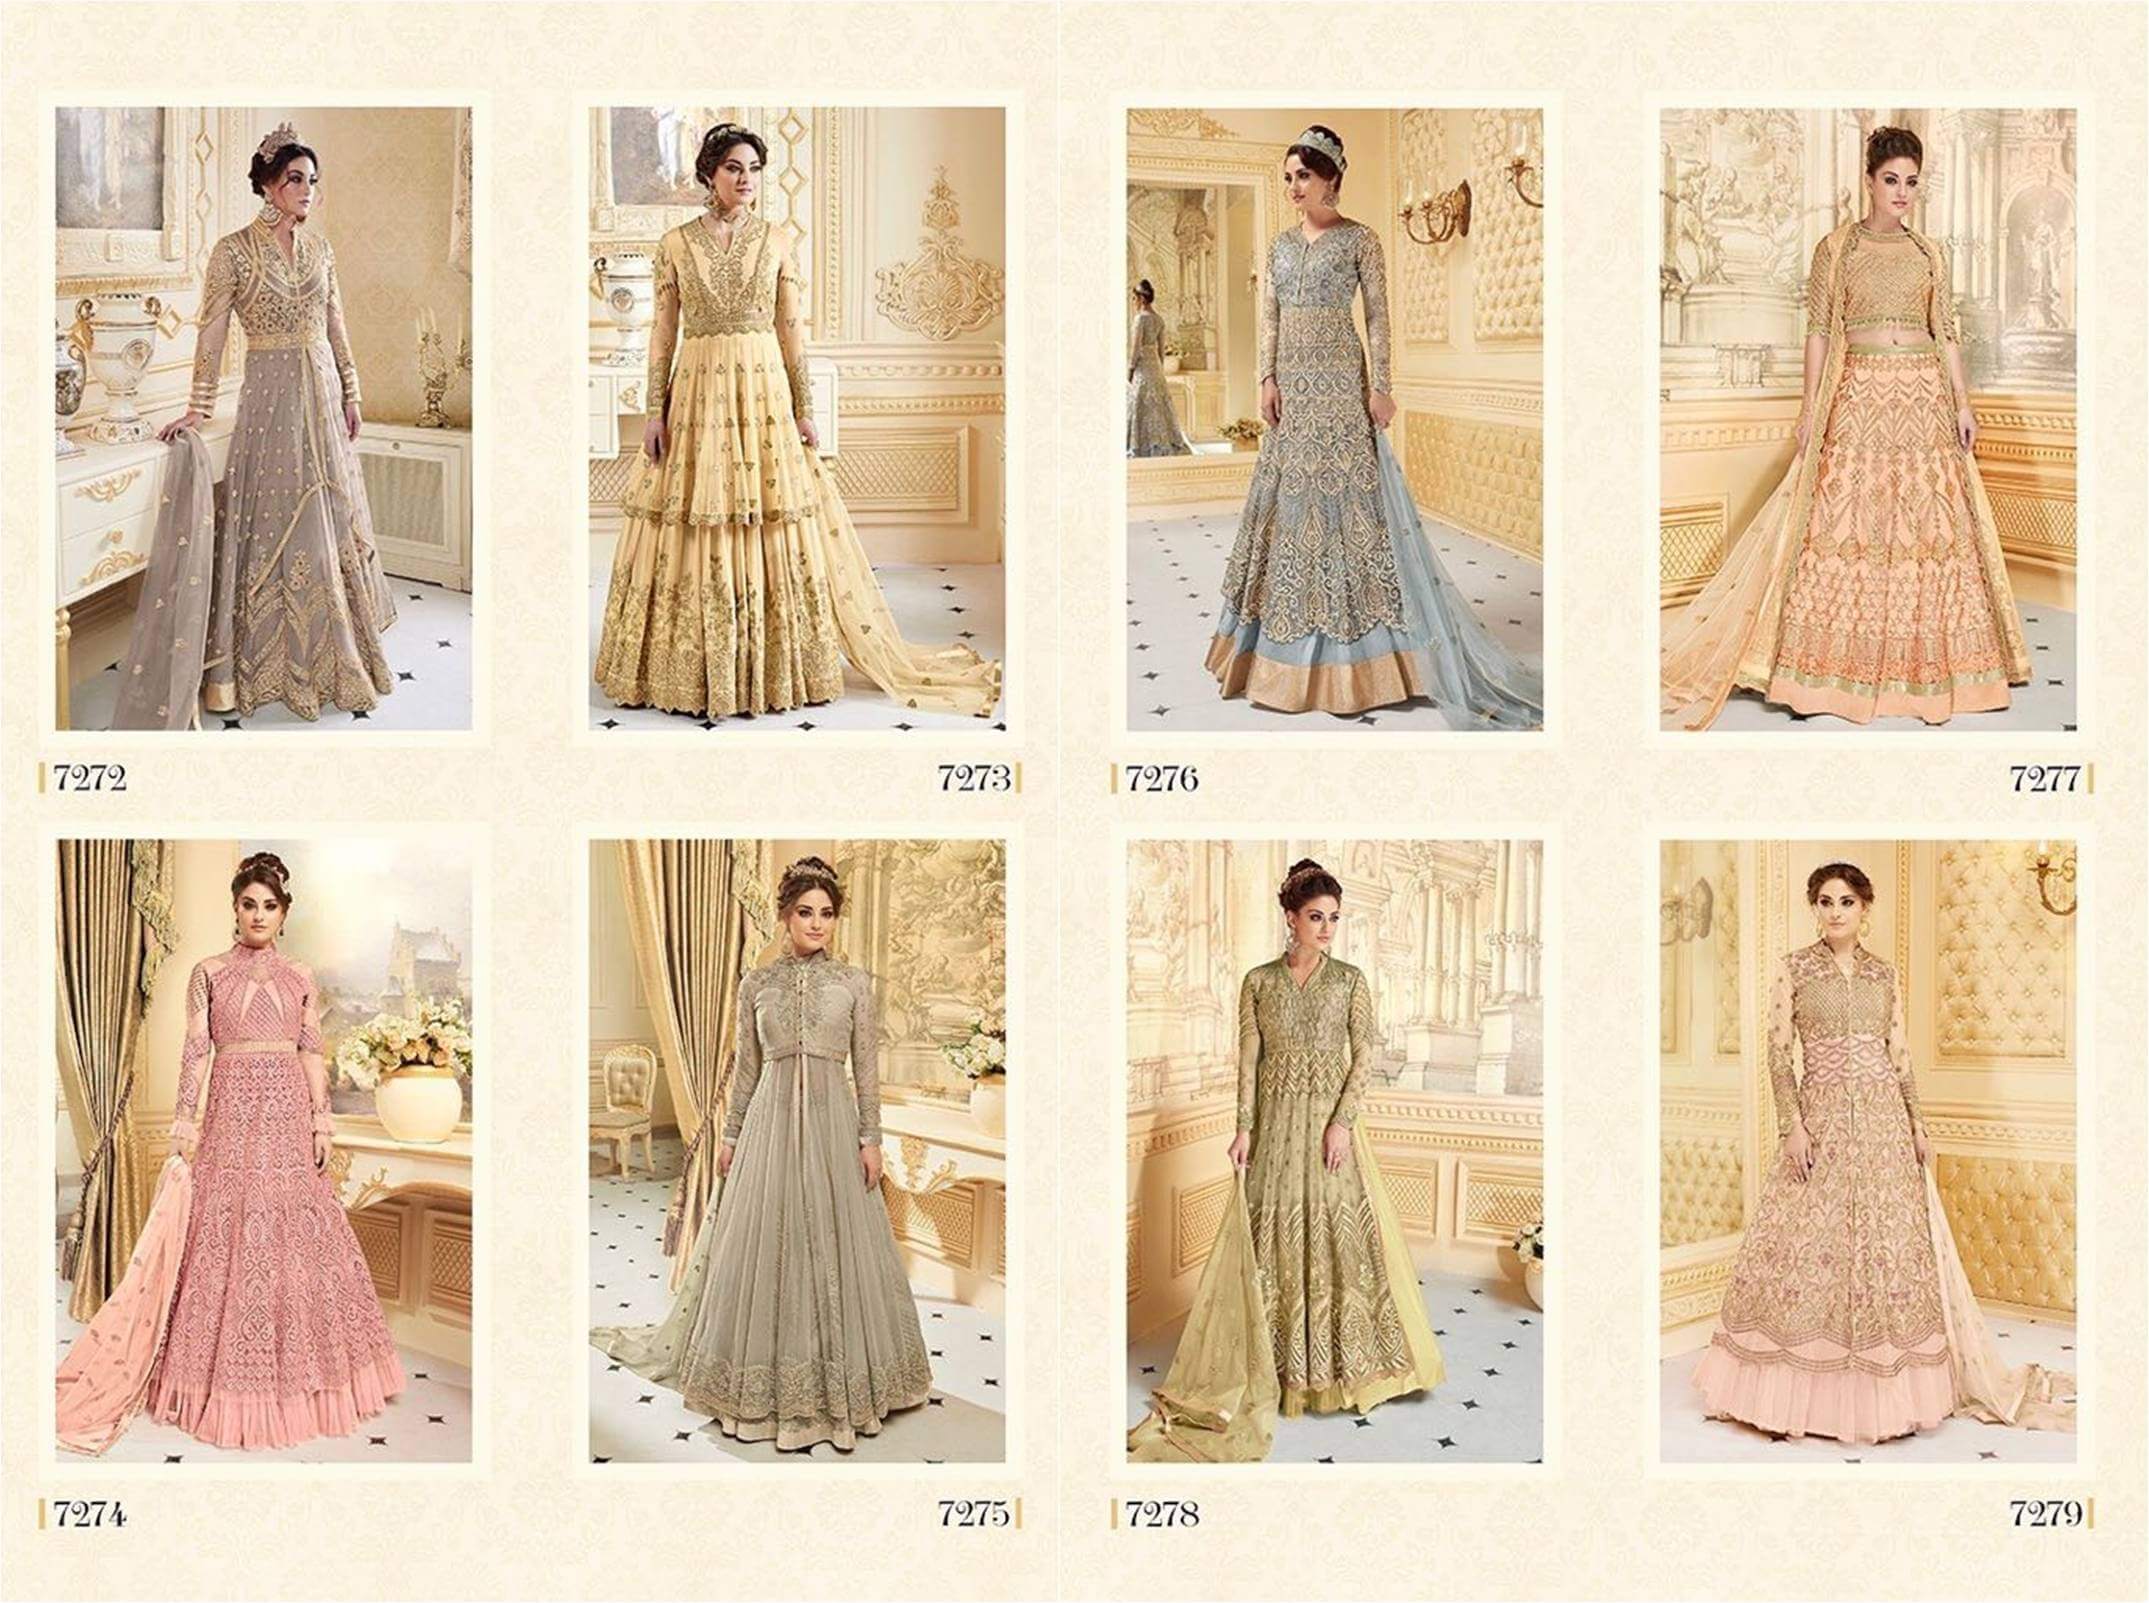 Glossy Sapphira 2 Heavy Embroidery Bridal Long Floor Length Suits